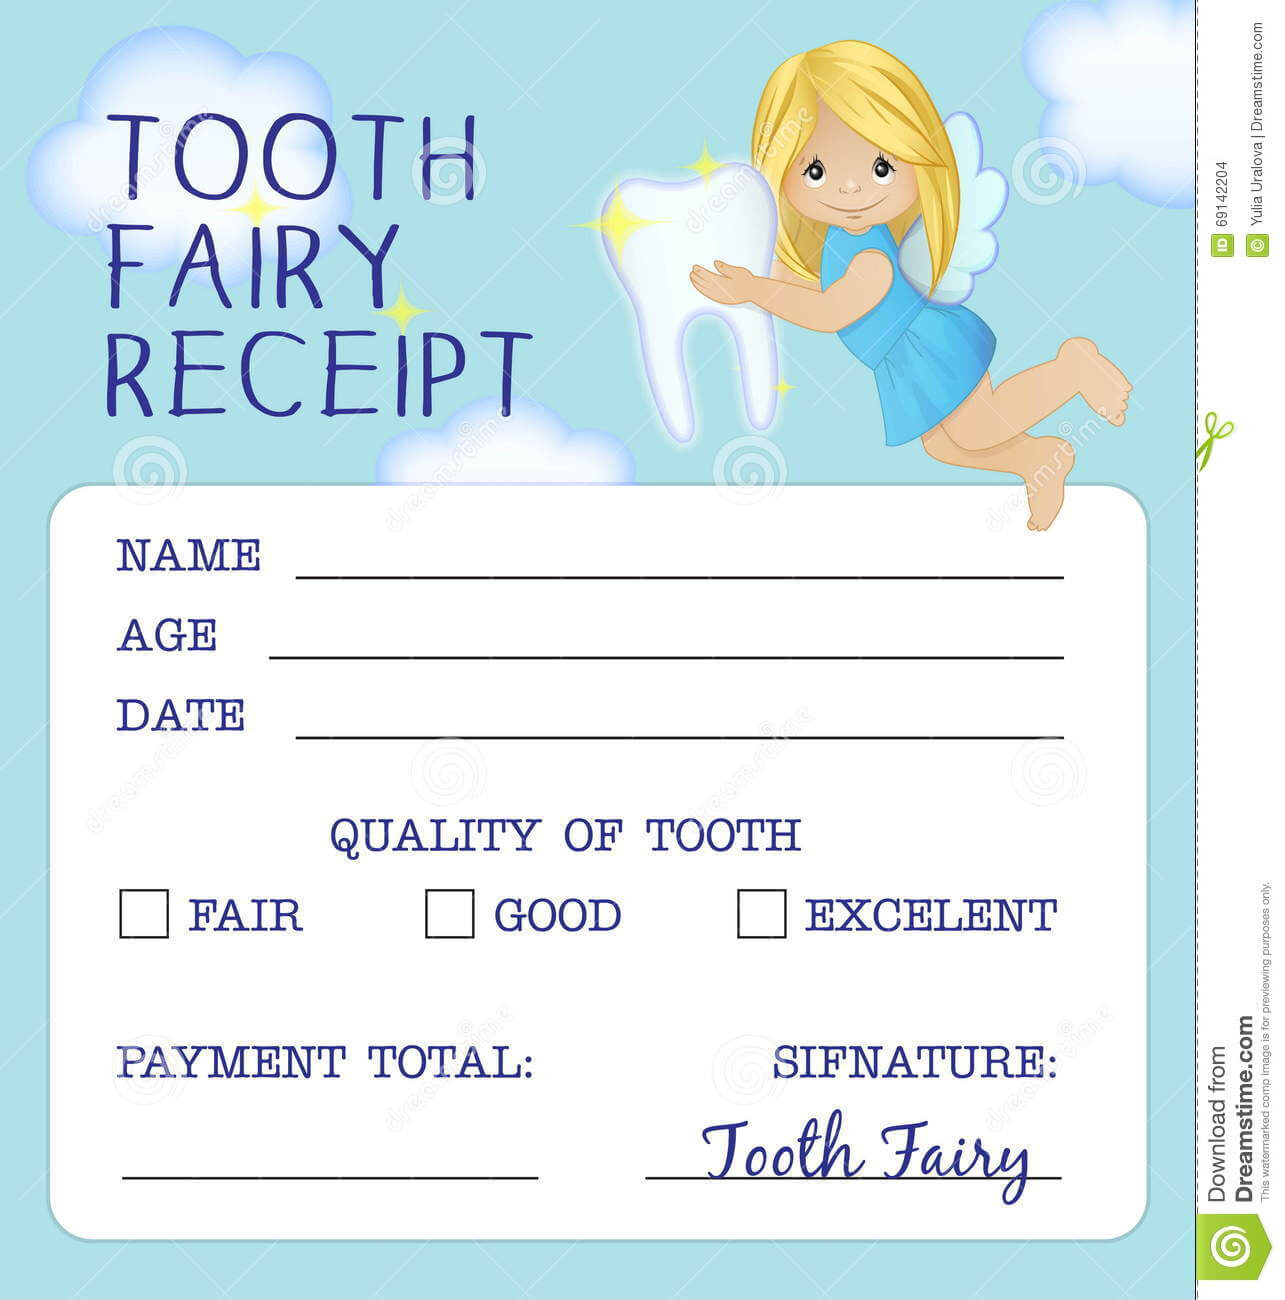 Tooth Fairy Receipt Certificate Design Stock Vector in Tooth Fairy